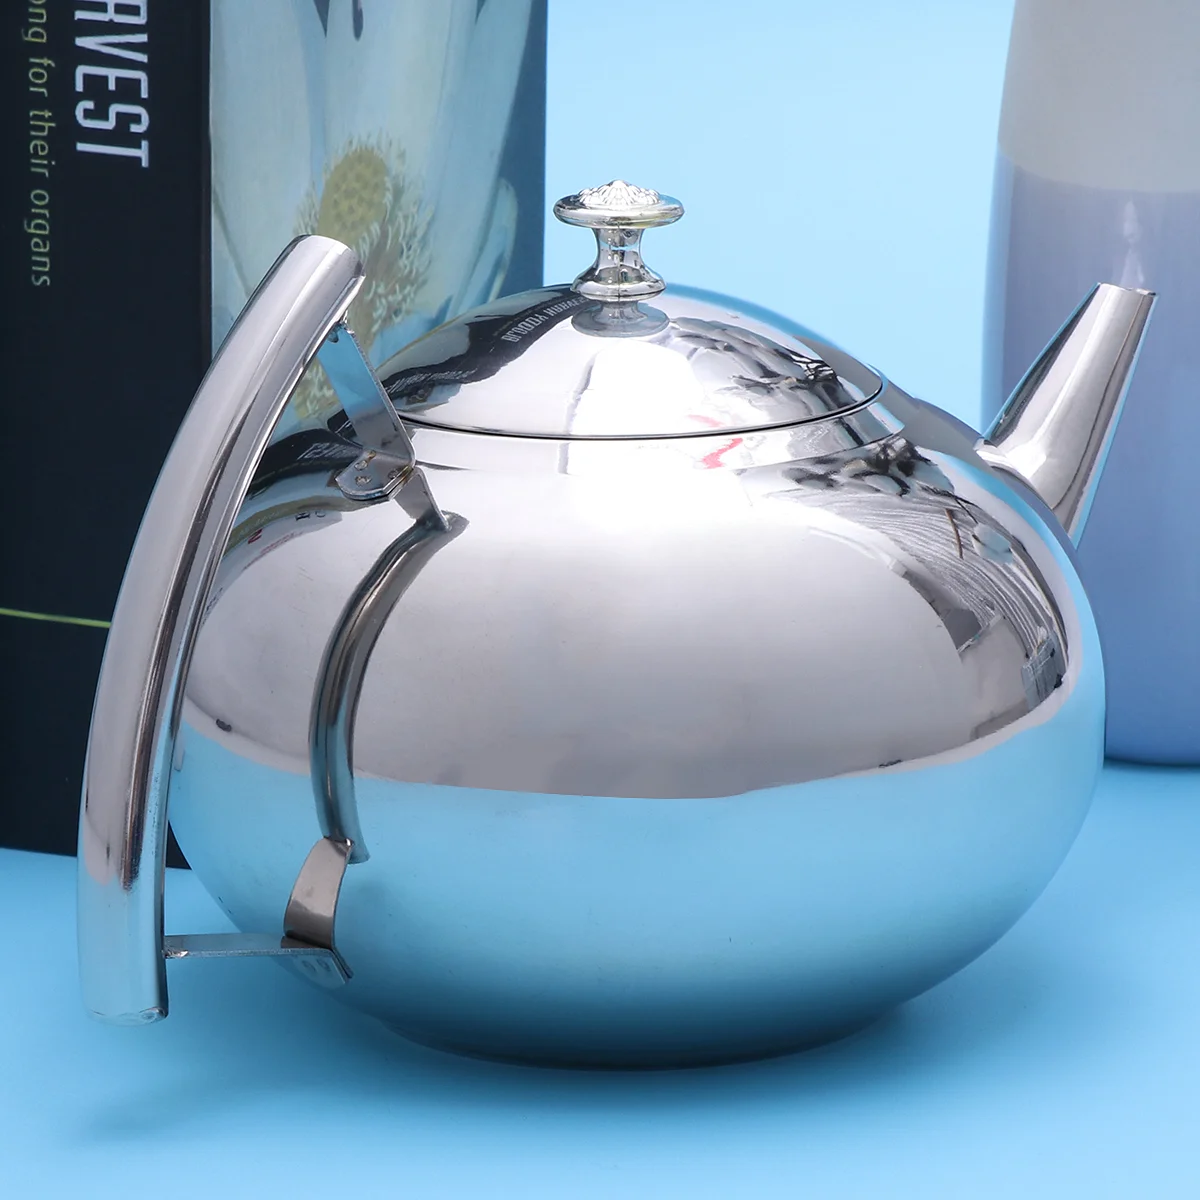 

Tea Kettle Teapot Pot Steel Stainless Coffee Infuser Stove Teapots Whistling Water Infusion Teakettle Metal Maker Stovetop